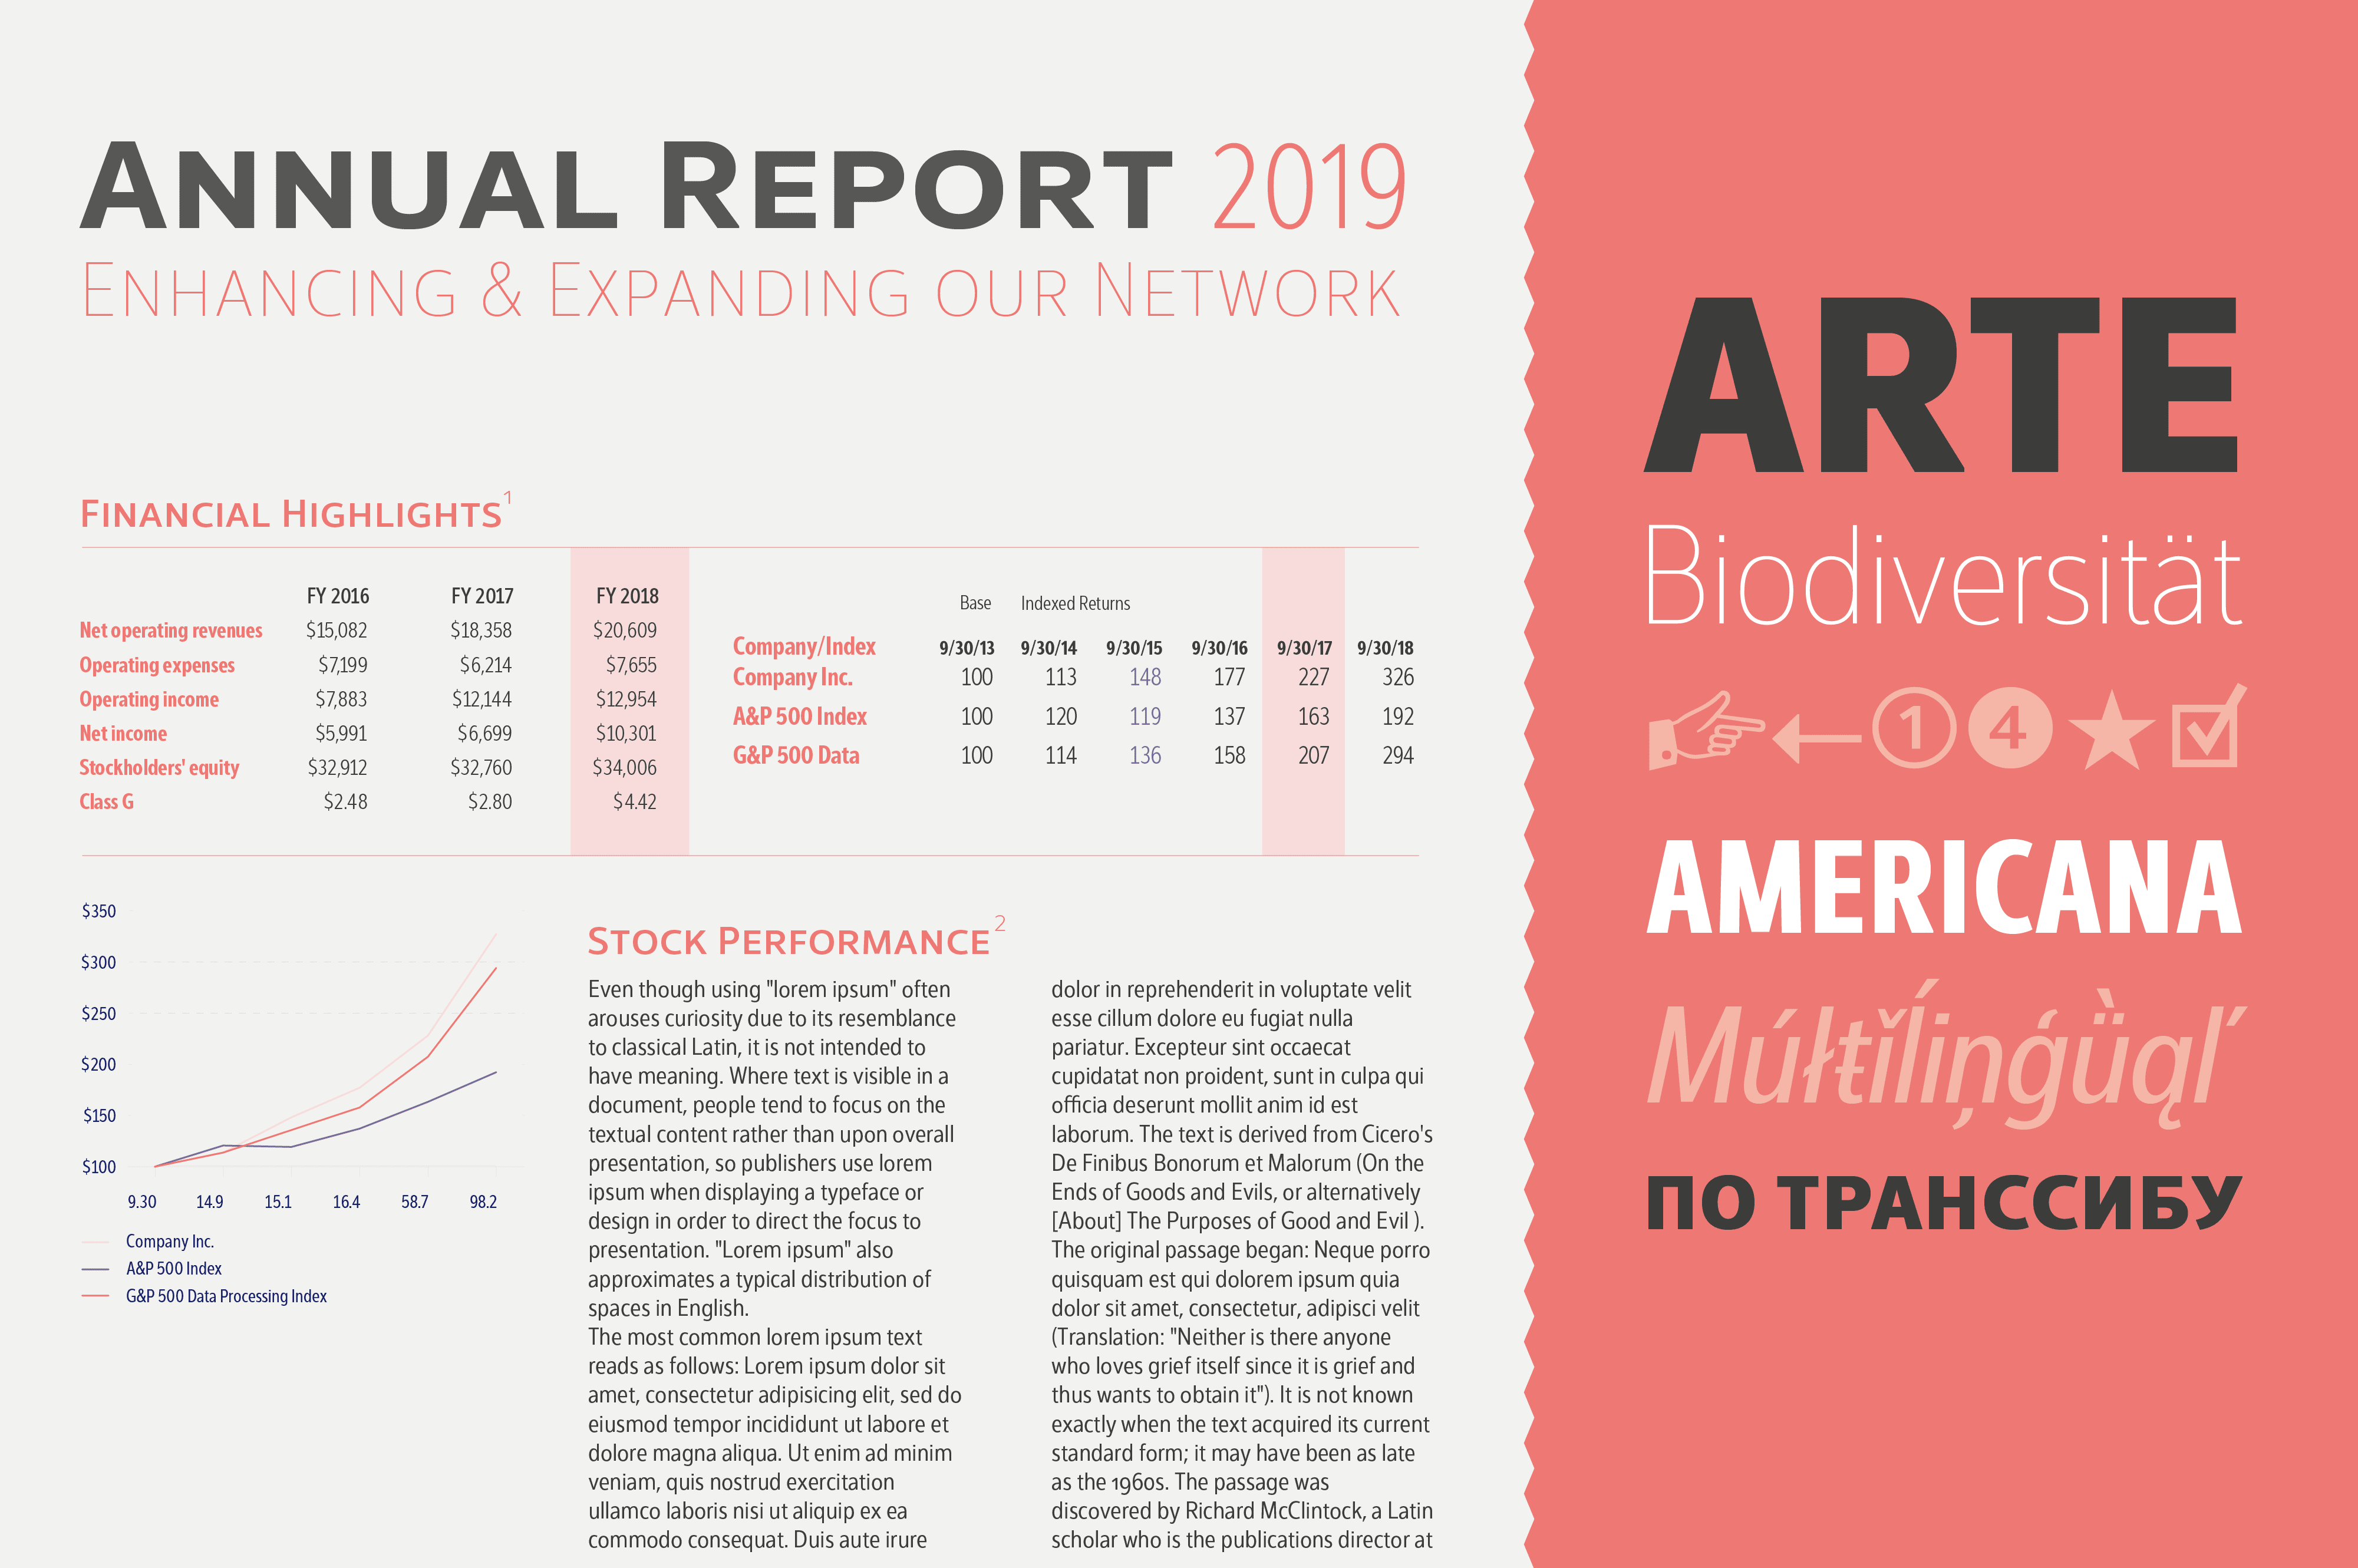 Interval Next font family in use for annual report